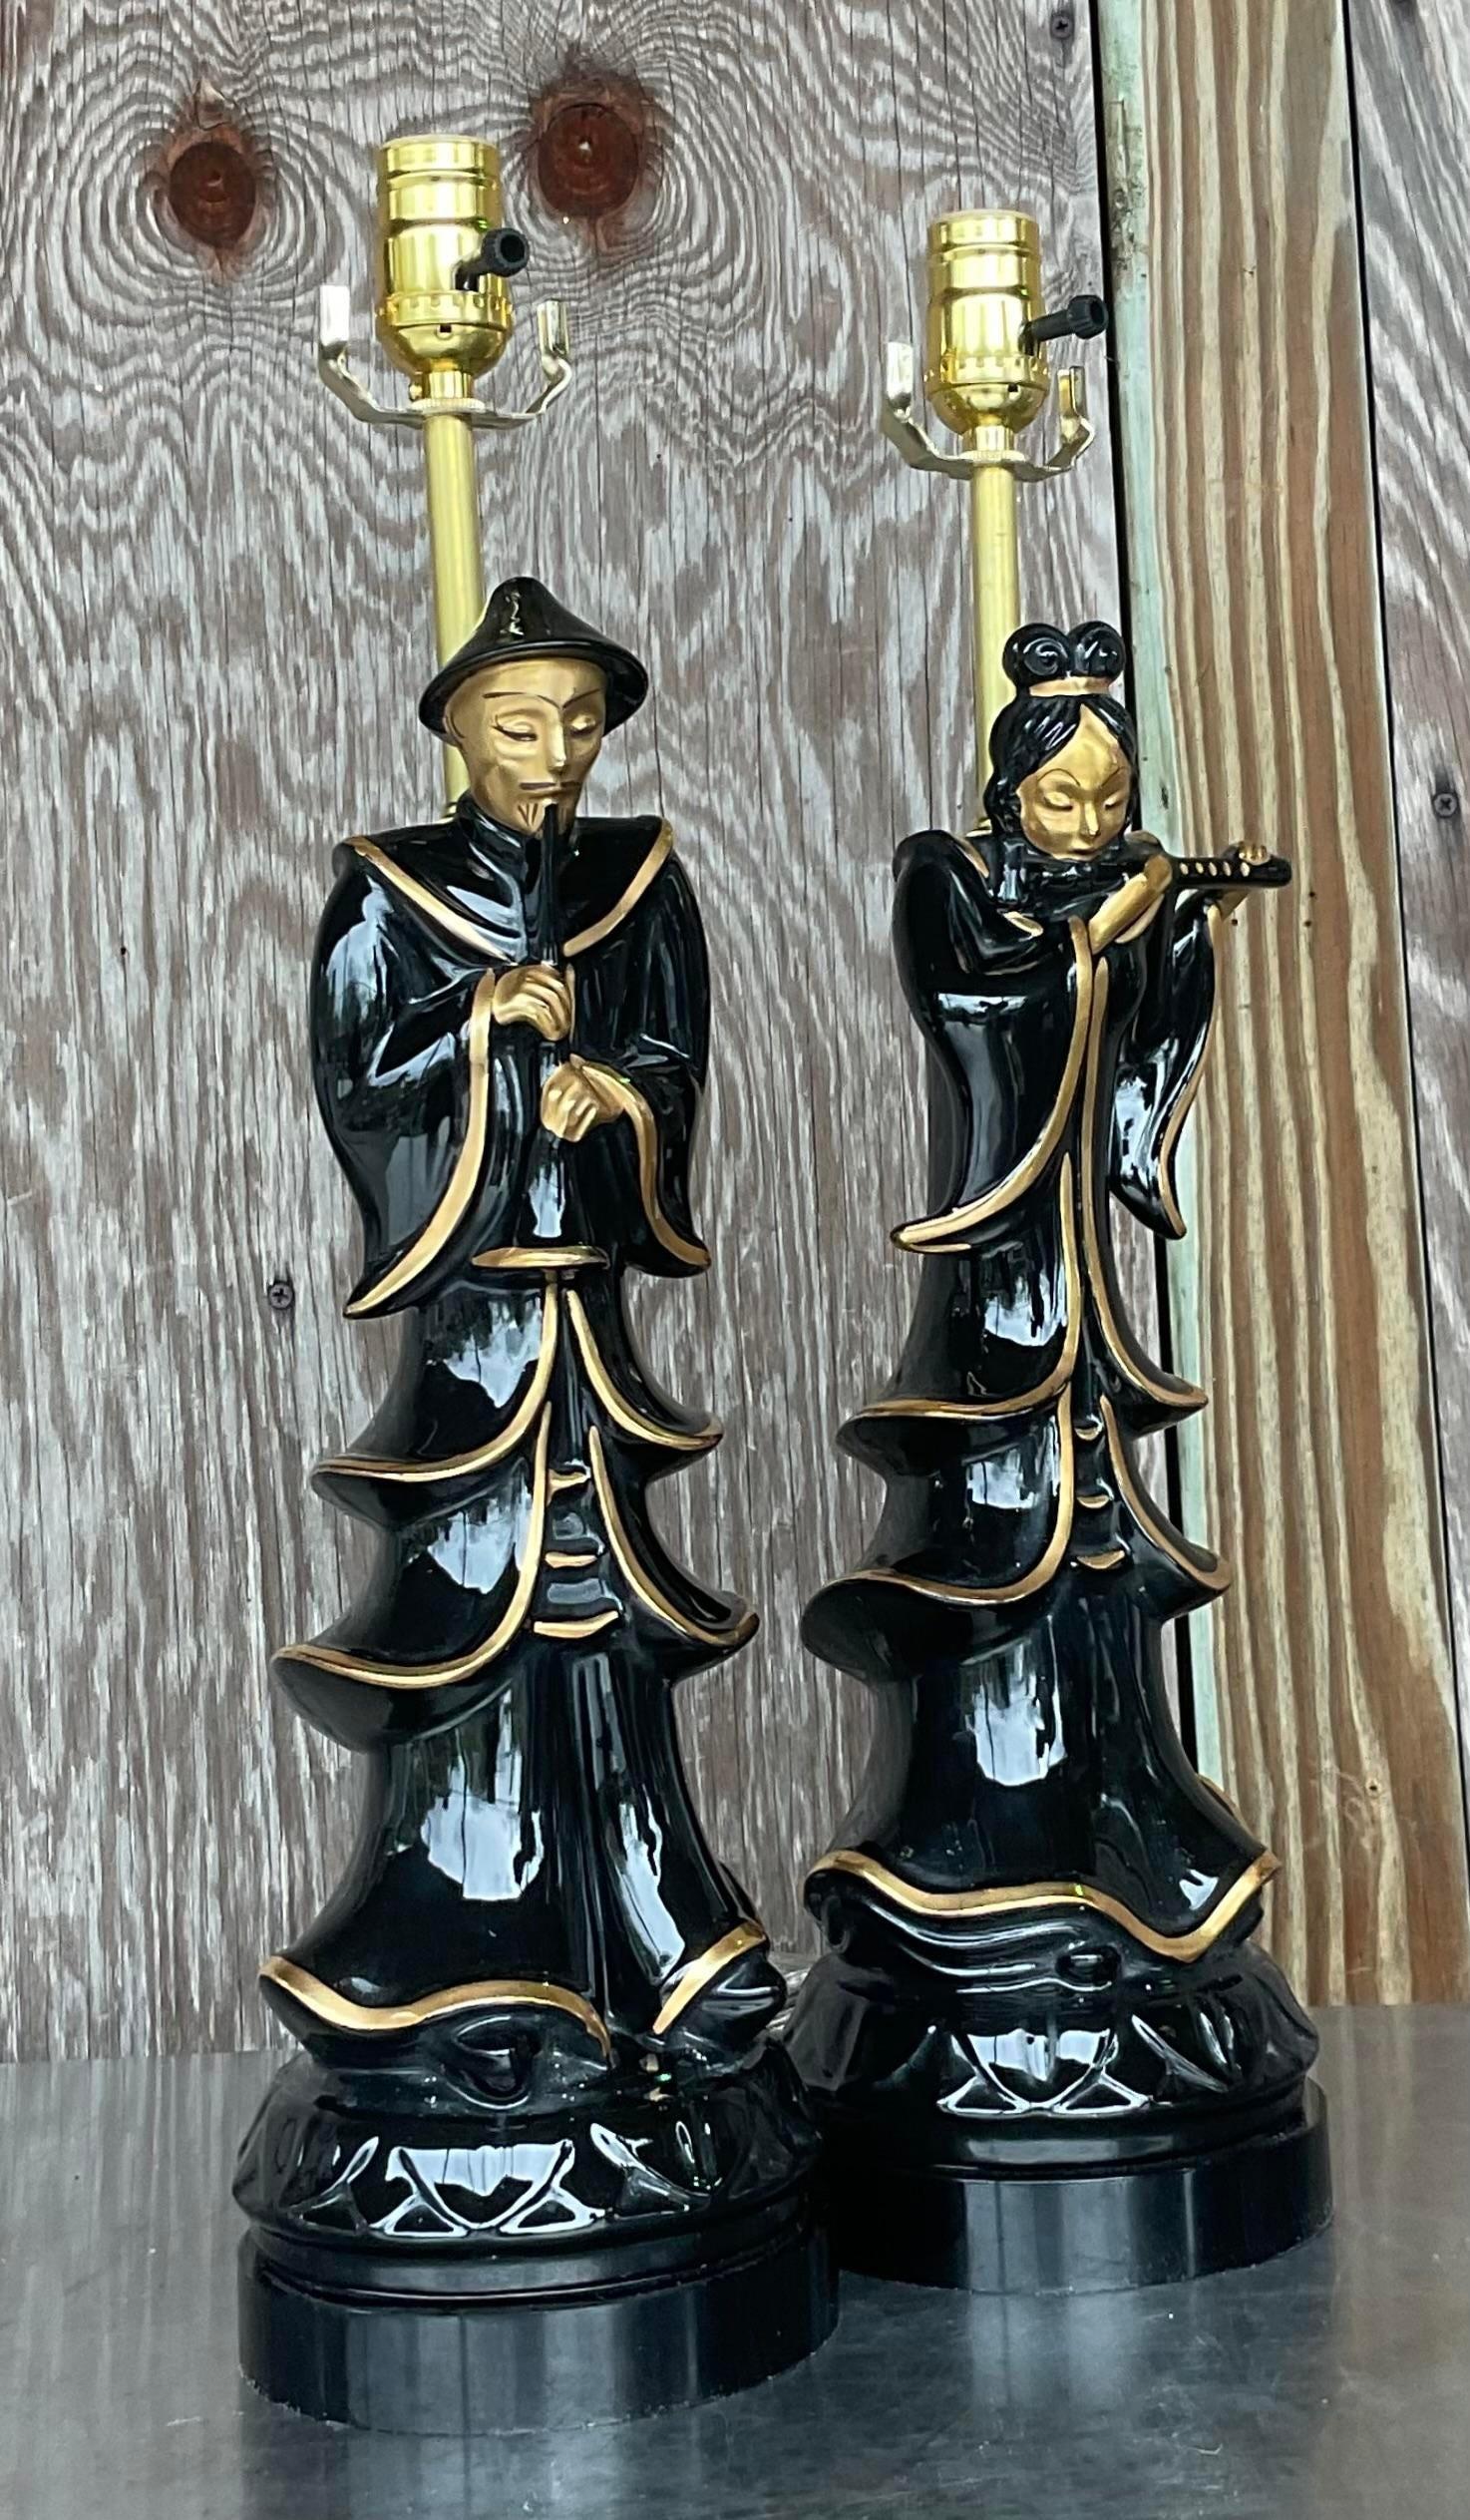 A fabulous vintage Asian pair of lamps. A glamorous Emperor couple in a sleek black glazed ceramic with gilt touches. Fully restored with all new wiring, hardware and black lucite plinths. Acquired from a Palm Beach estate.

Smaller lamp is 5x5x21